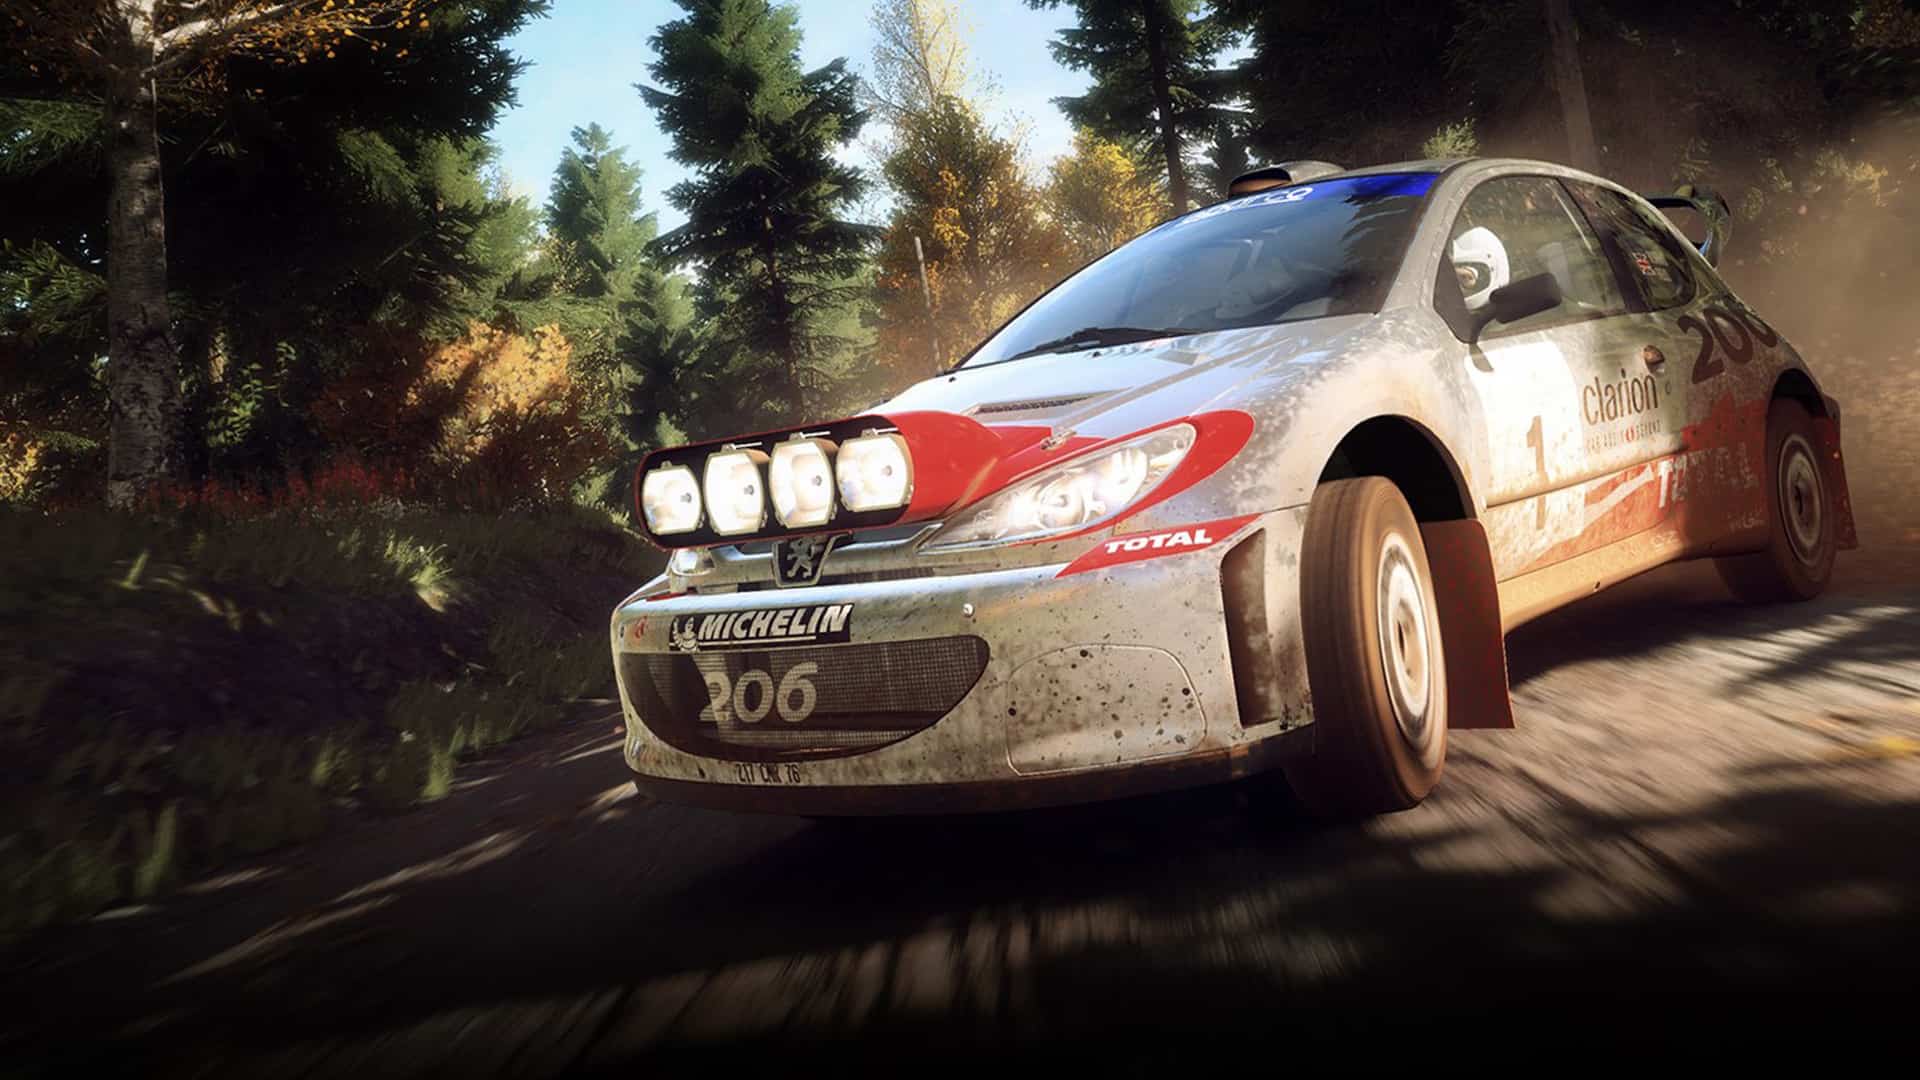 DiRT Rally 2.0 hits 12 million players on fourth anniversary